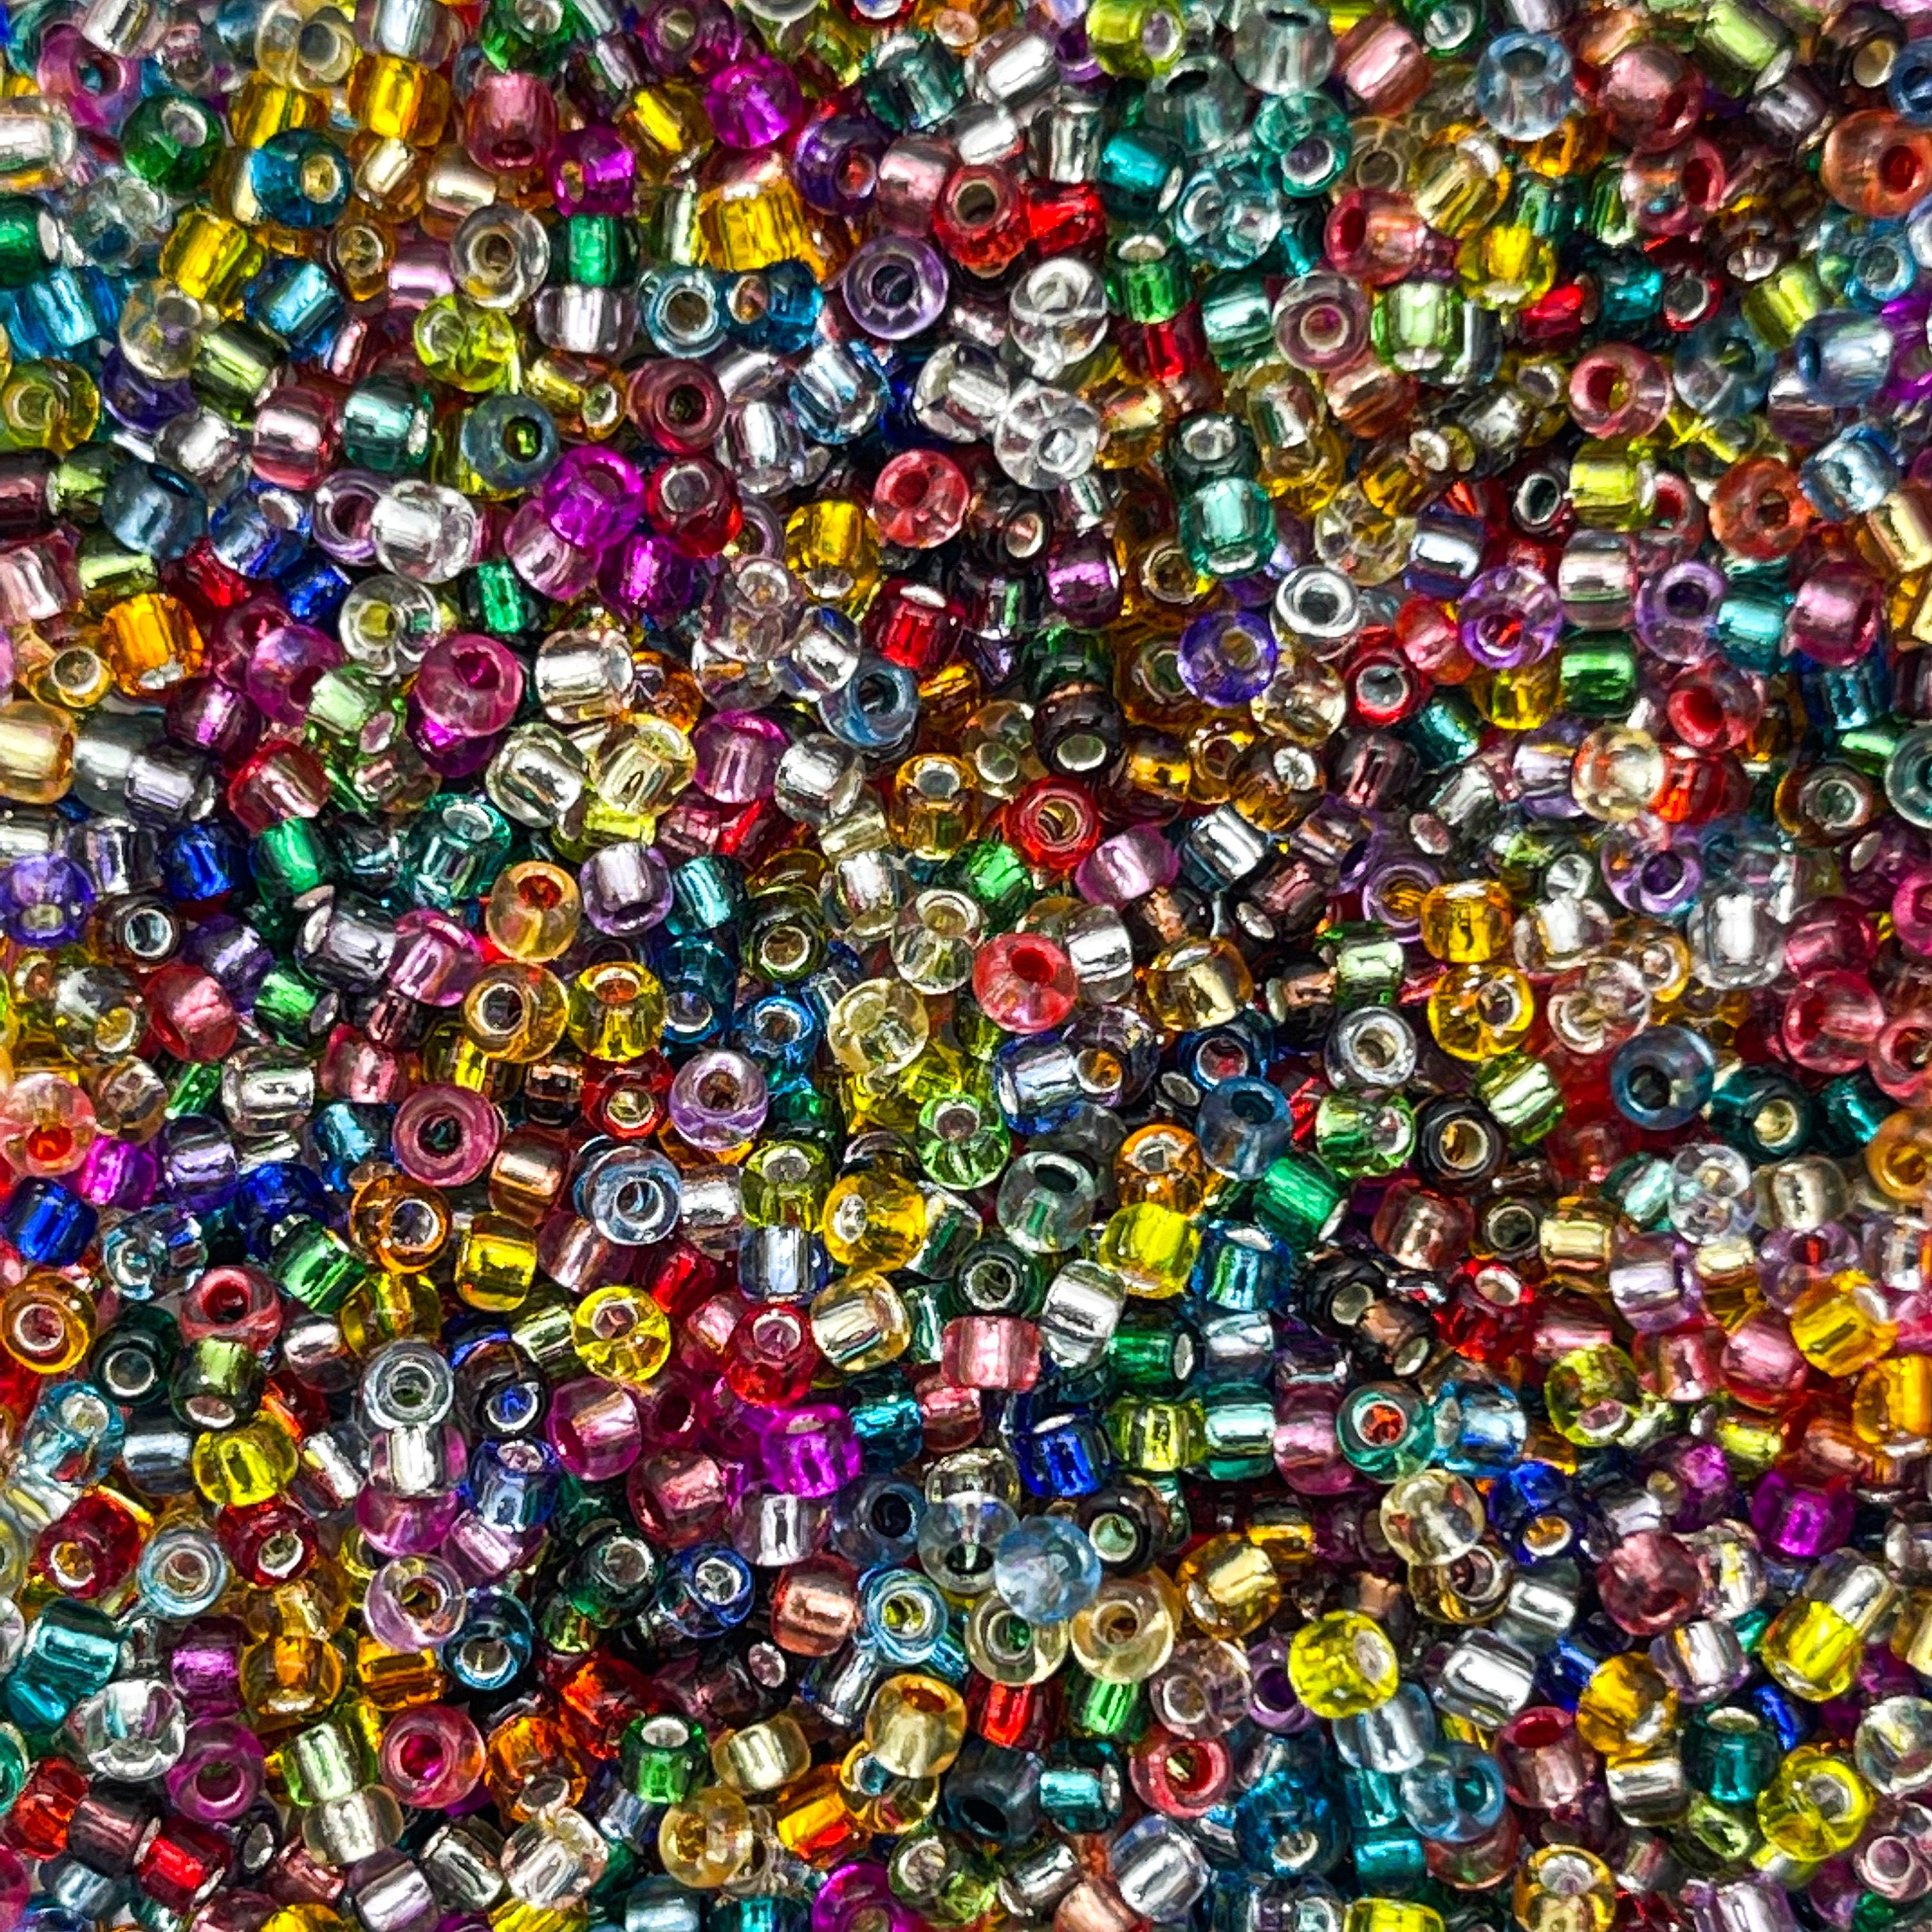 Japanese Glass Seed Beads Size 11/0-Multi-Silverlined